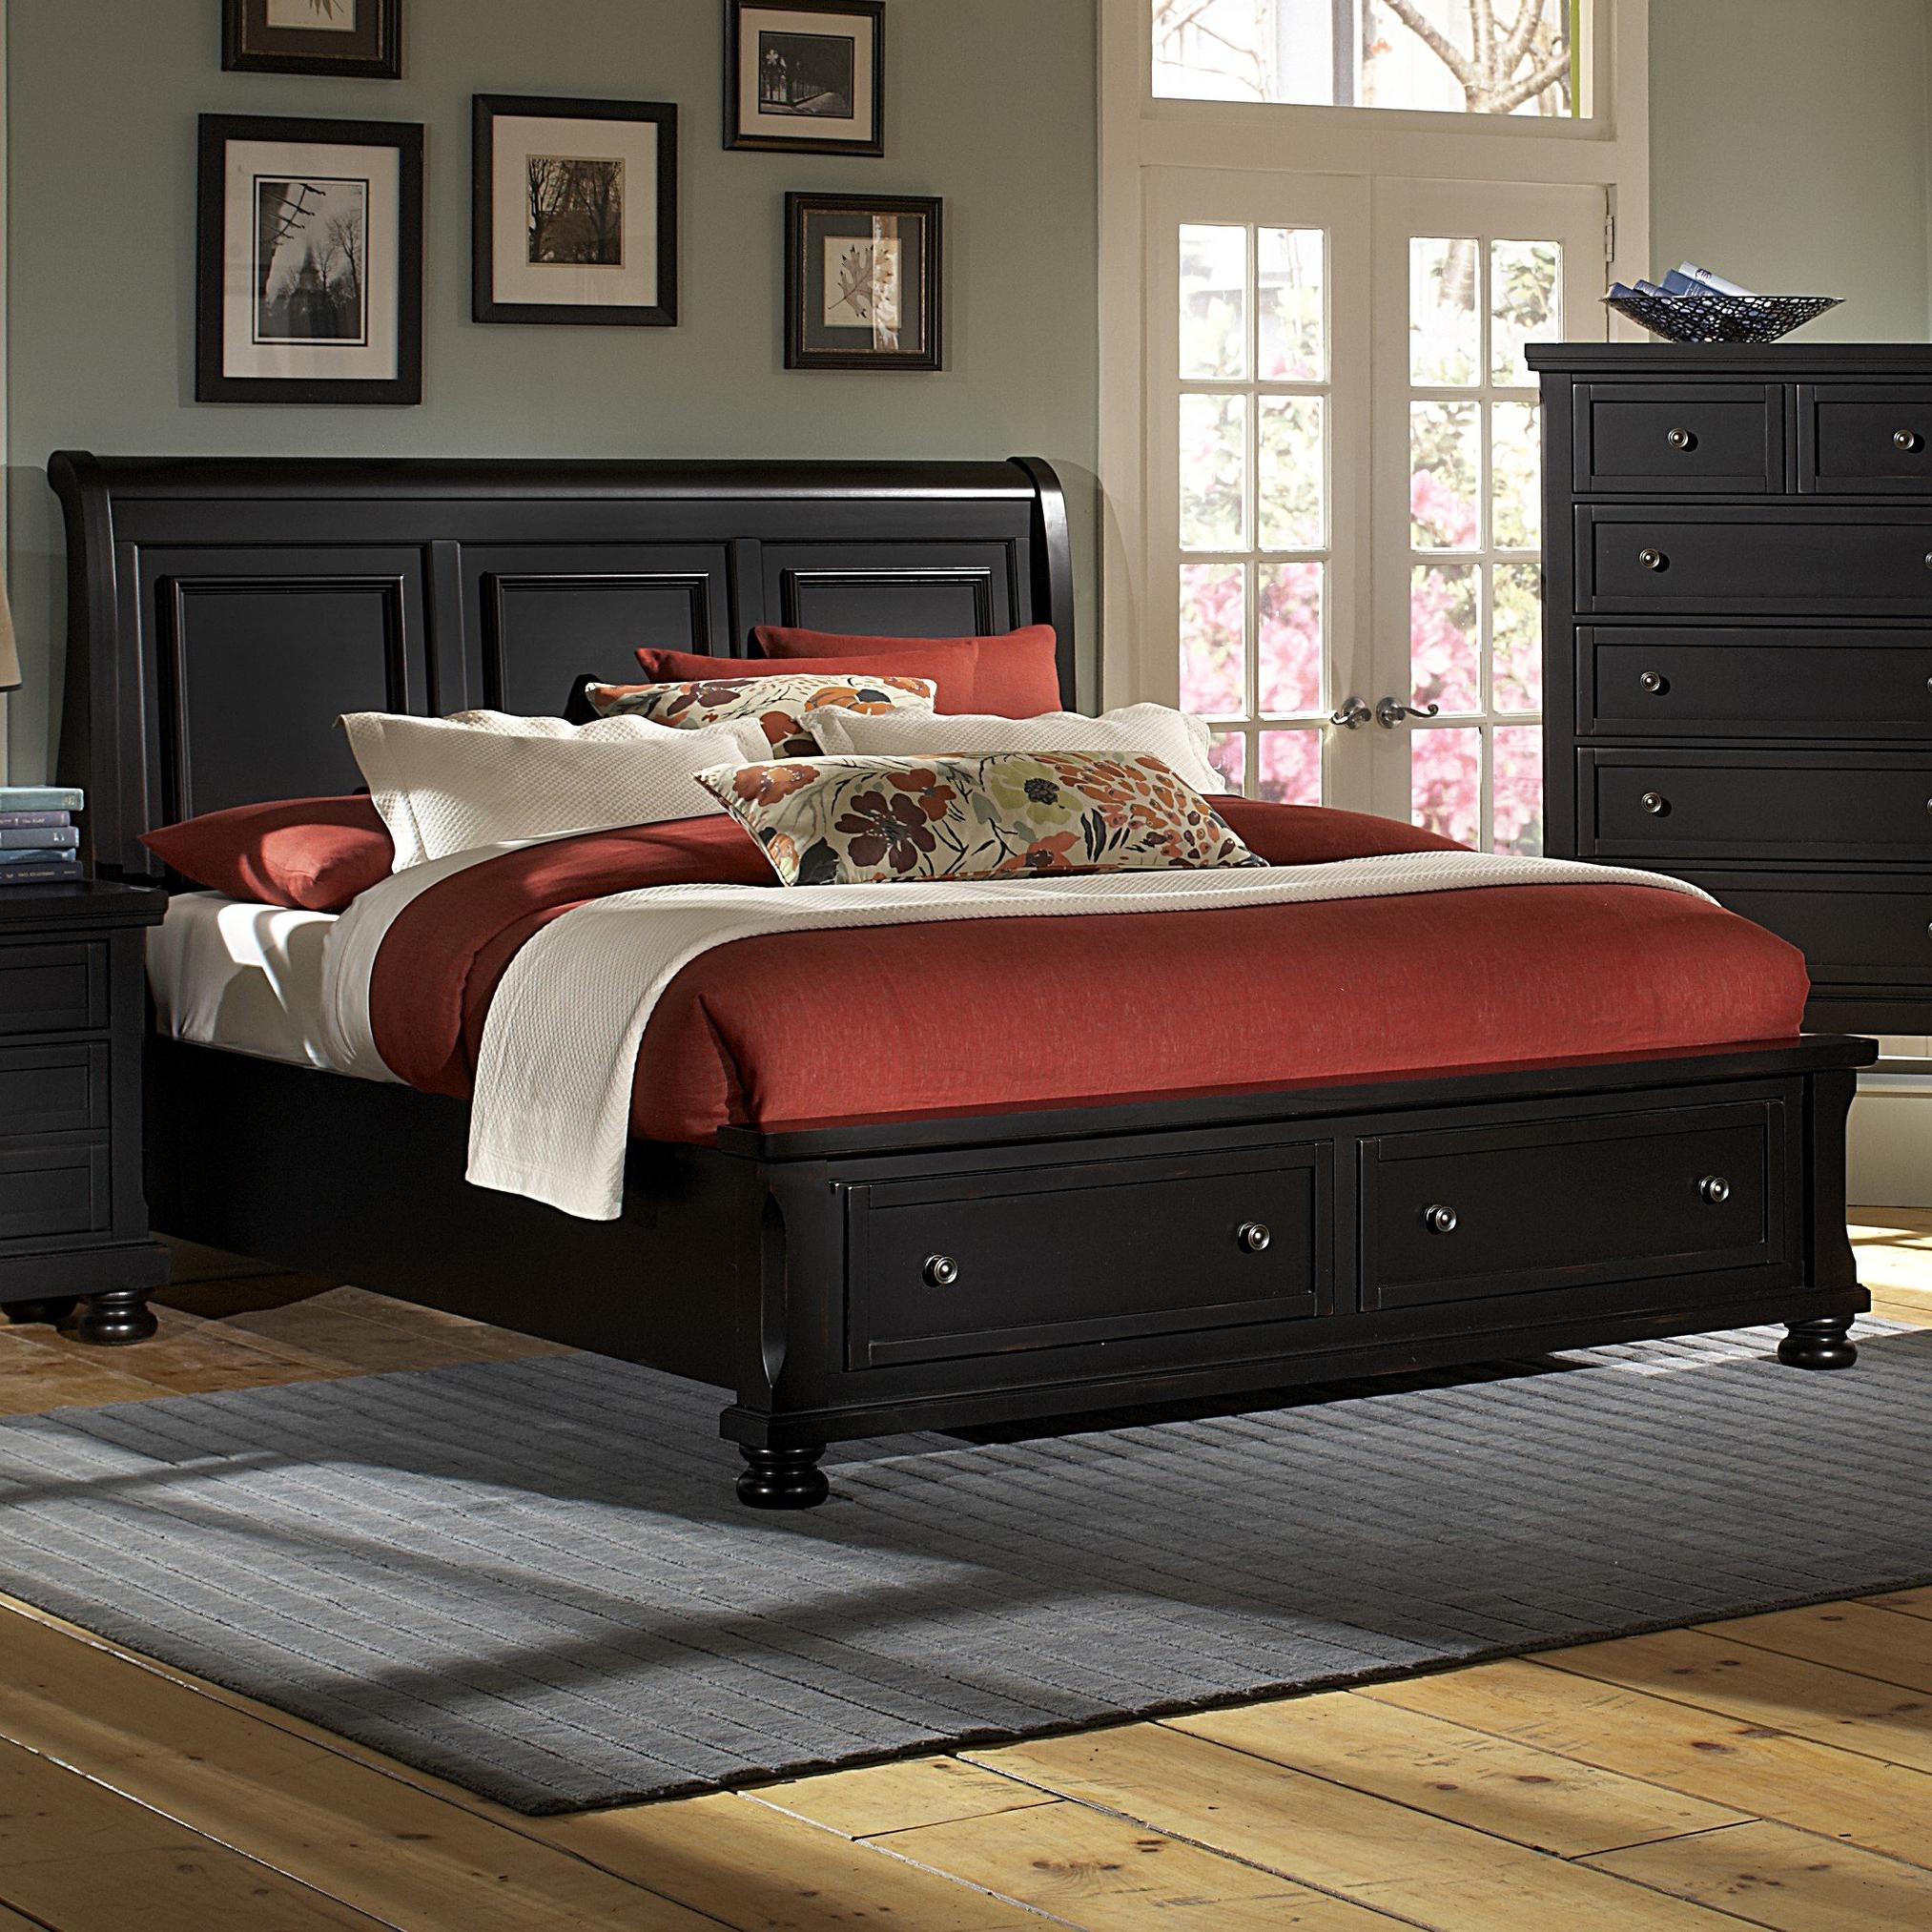 Reflections Queen Storage Bed With Sleigh Headboard Vaughan Bassett At Value City Furniture in measurements 2026 X 2026